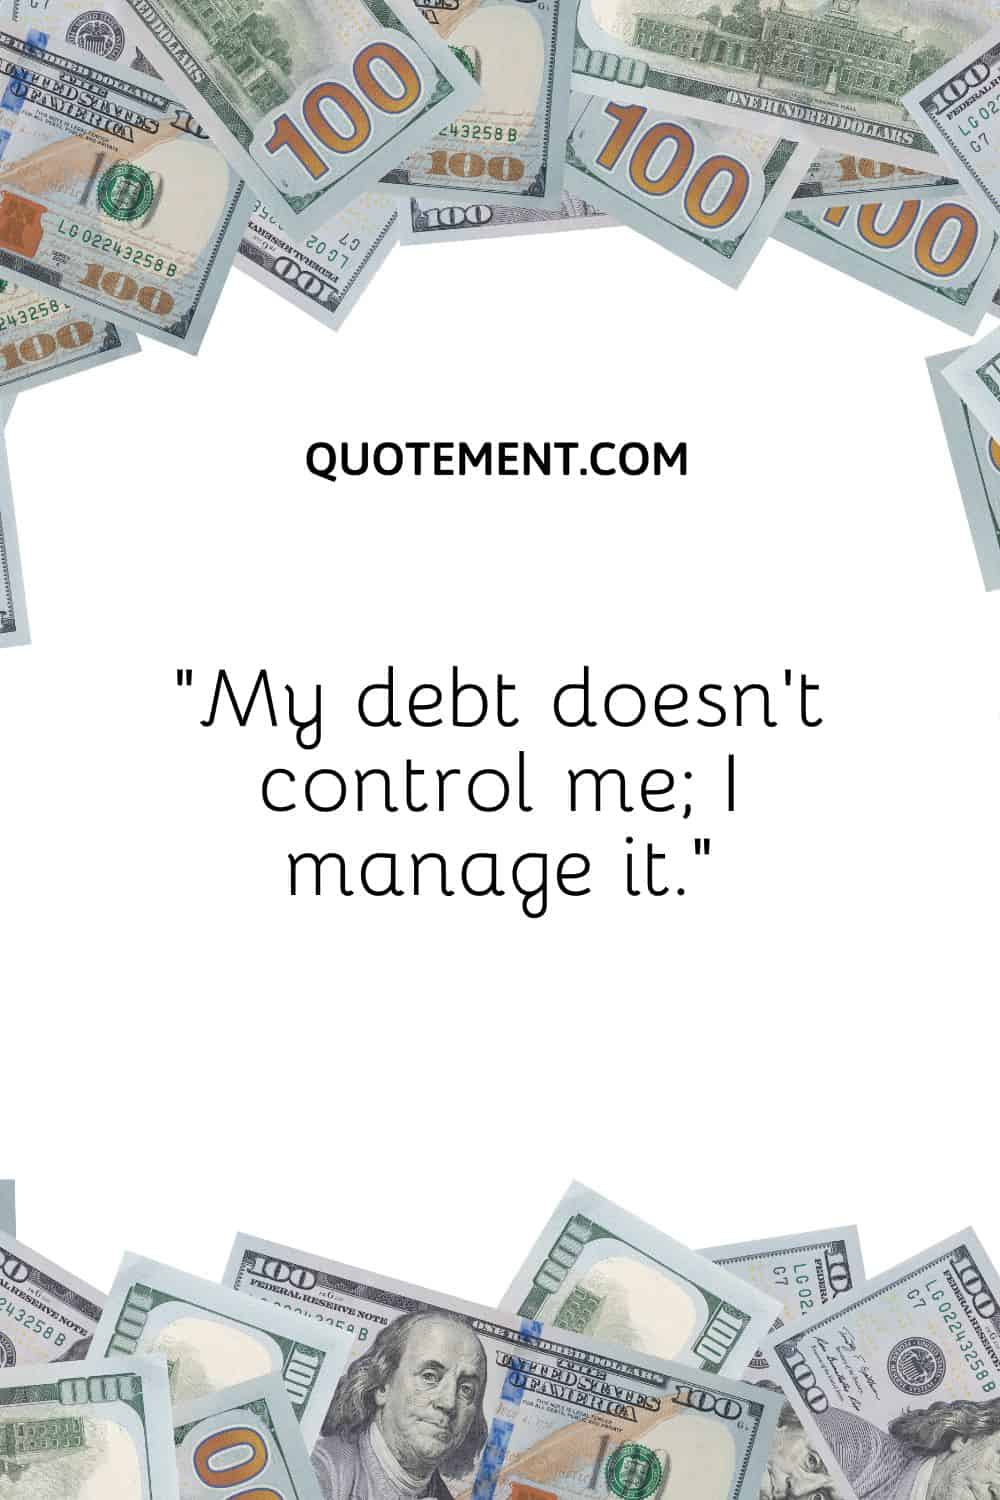 “My debt doesn’t control me; I manage it.”